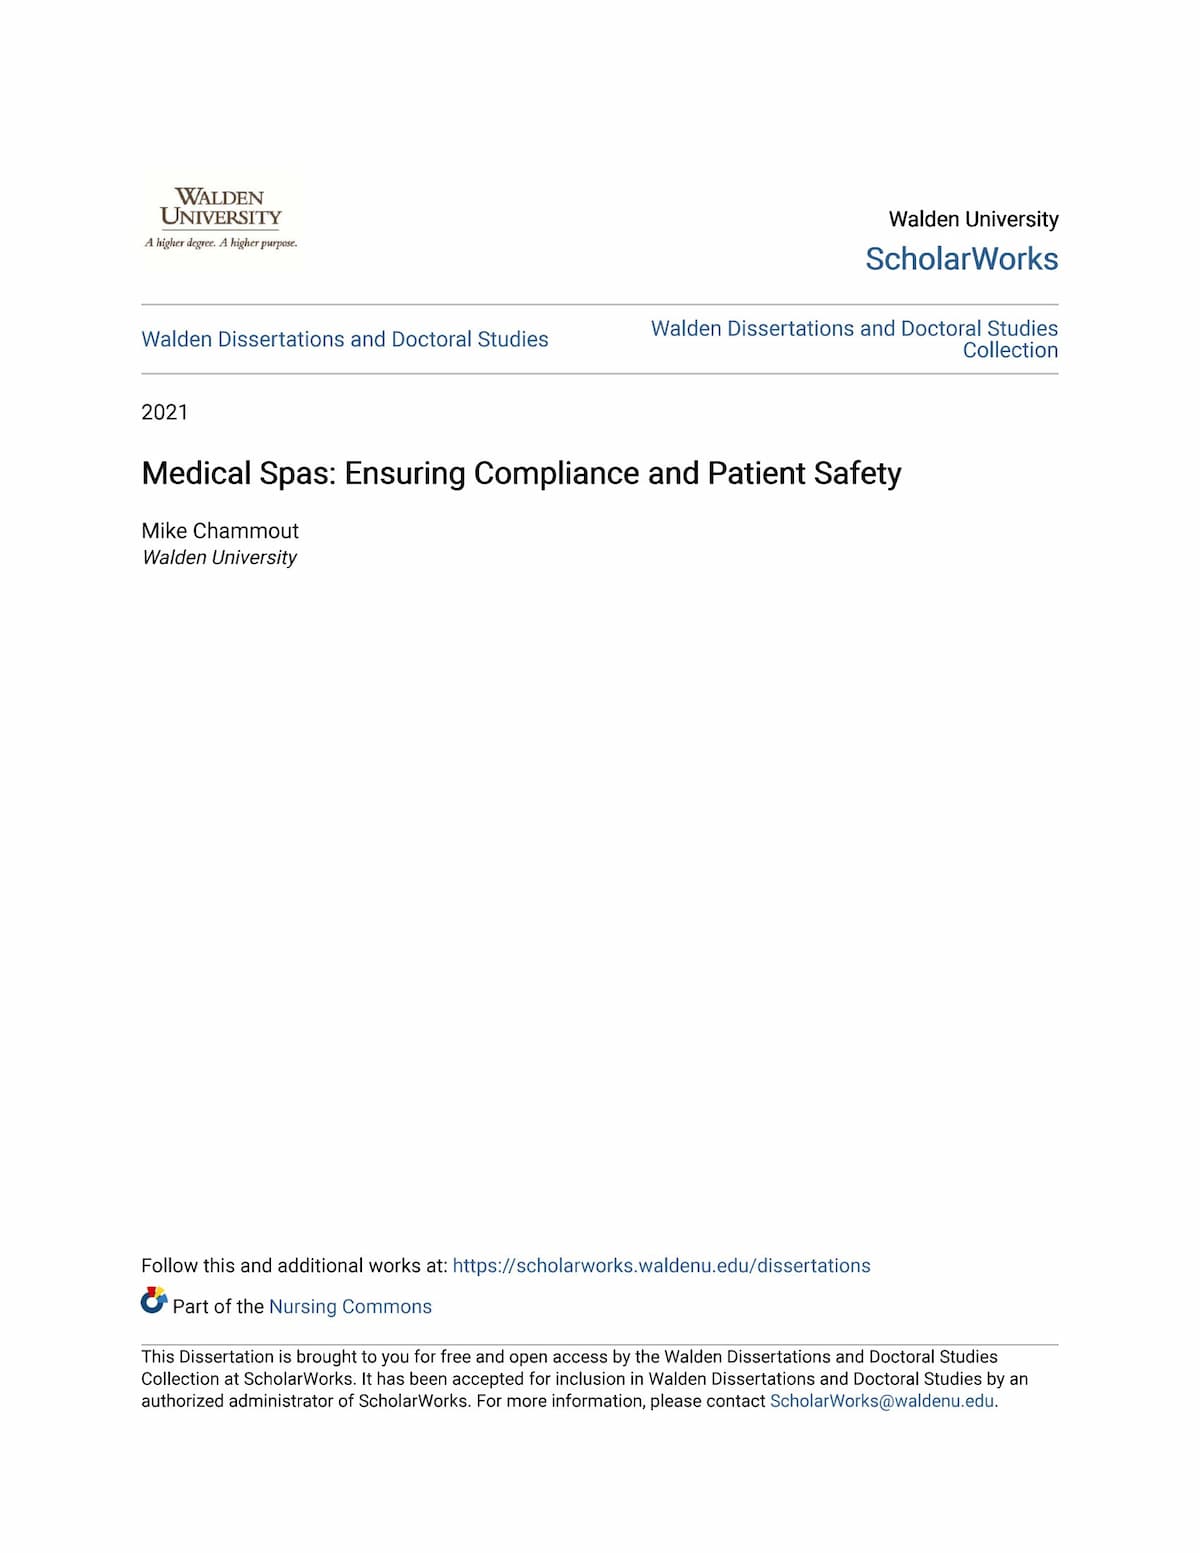 Medical Spas Ensuring Compliance and Patient Safety, Mike Chammout, Walden University, 78 pages - Download PDF